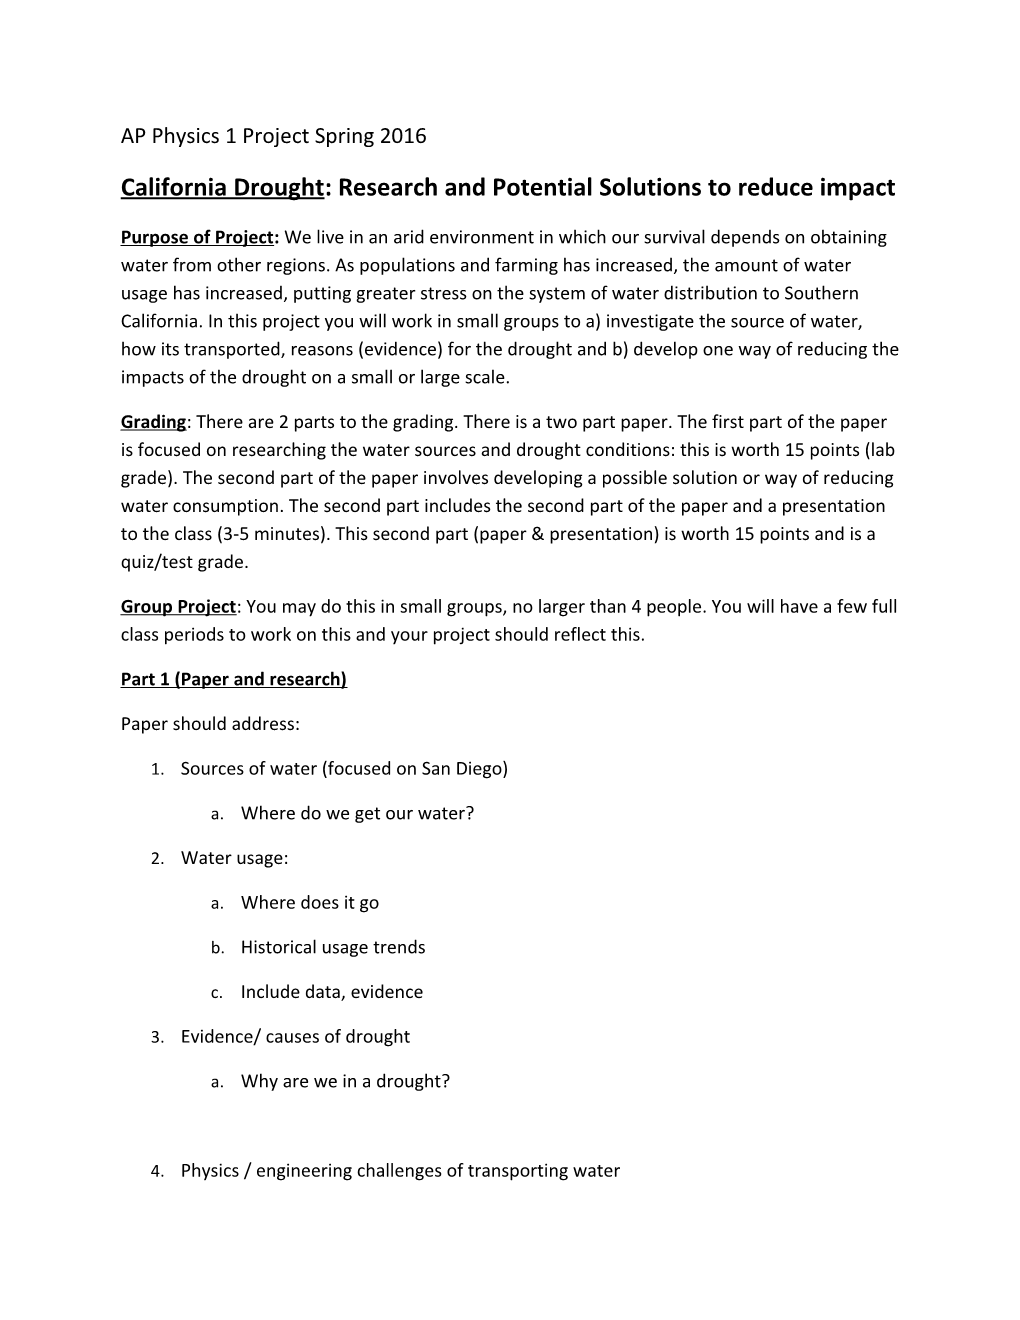 California Drought: Research and Potential Solutions to Reduce Impact